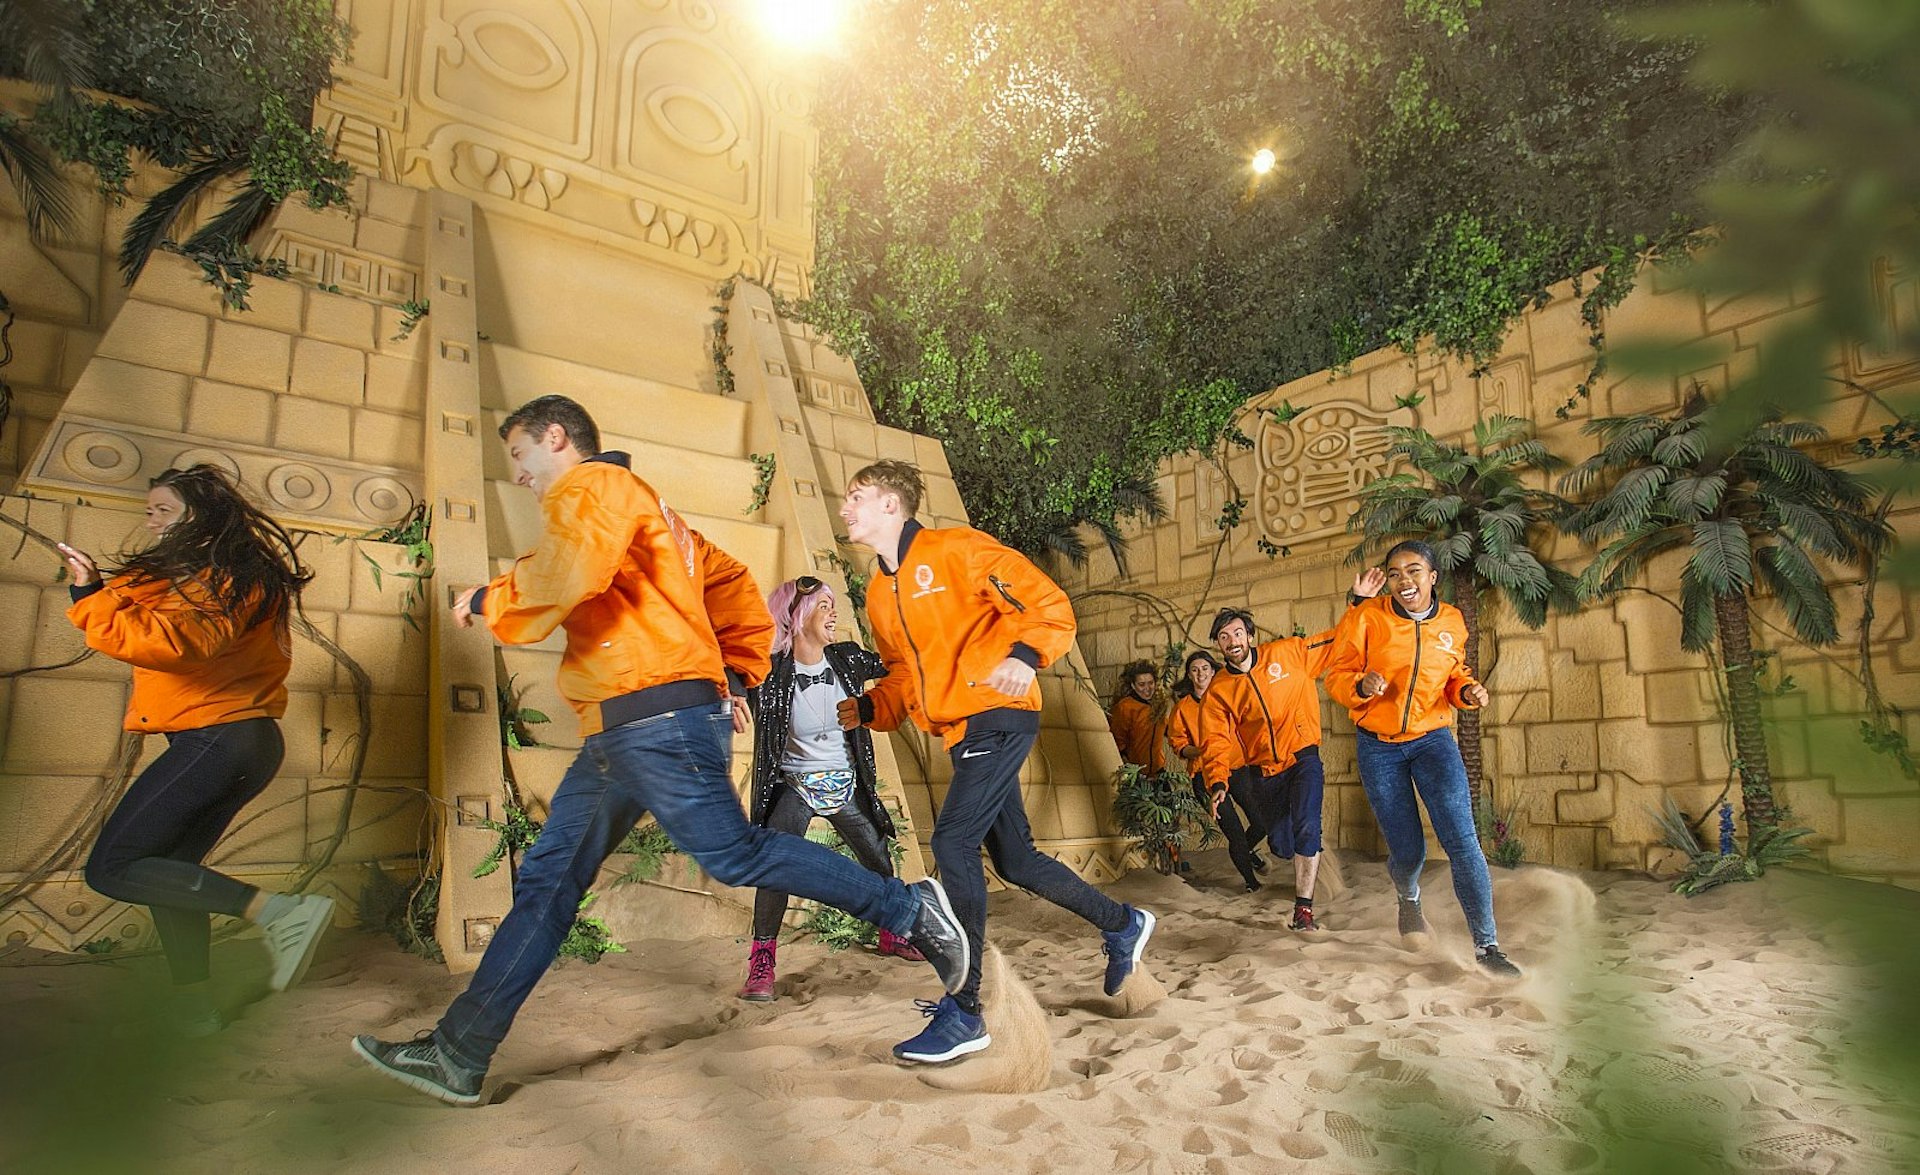 A group of people wearing orange bomber jackets run through a mock-up of an Aztec scene, with sand, a yellow pyramid and walls covered in creepers.